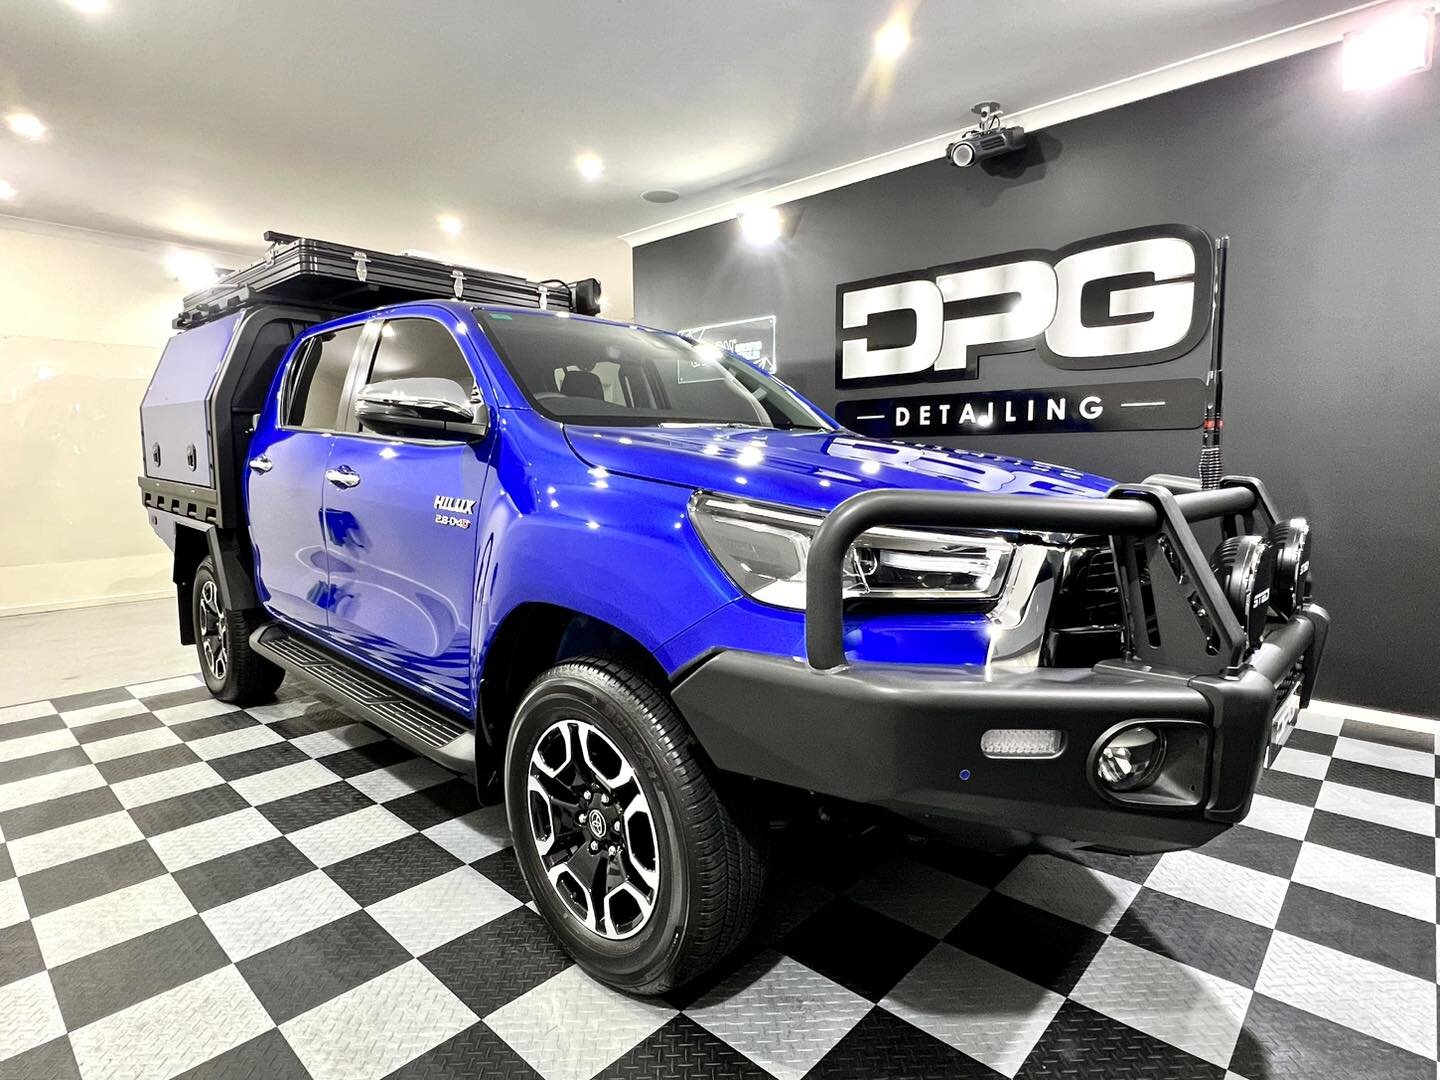 ⭐️⭐️ 2022 TOYOTA HILUX ⭐️⭐️

This brand new fully decked out Hilux came in to be topped off with our Gyeon coating. 
Our amazing returning clients are all set for that road trip adventure. 

How cool does that canopy look 😍

Work Completed: 

✅ Ligh